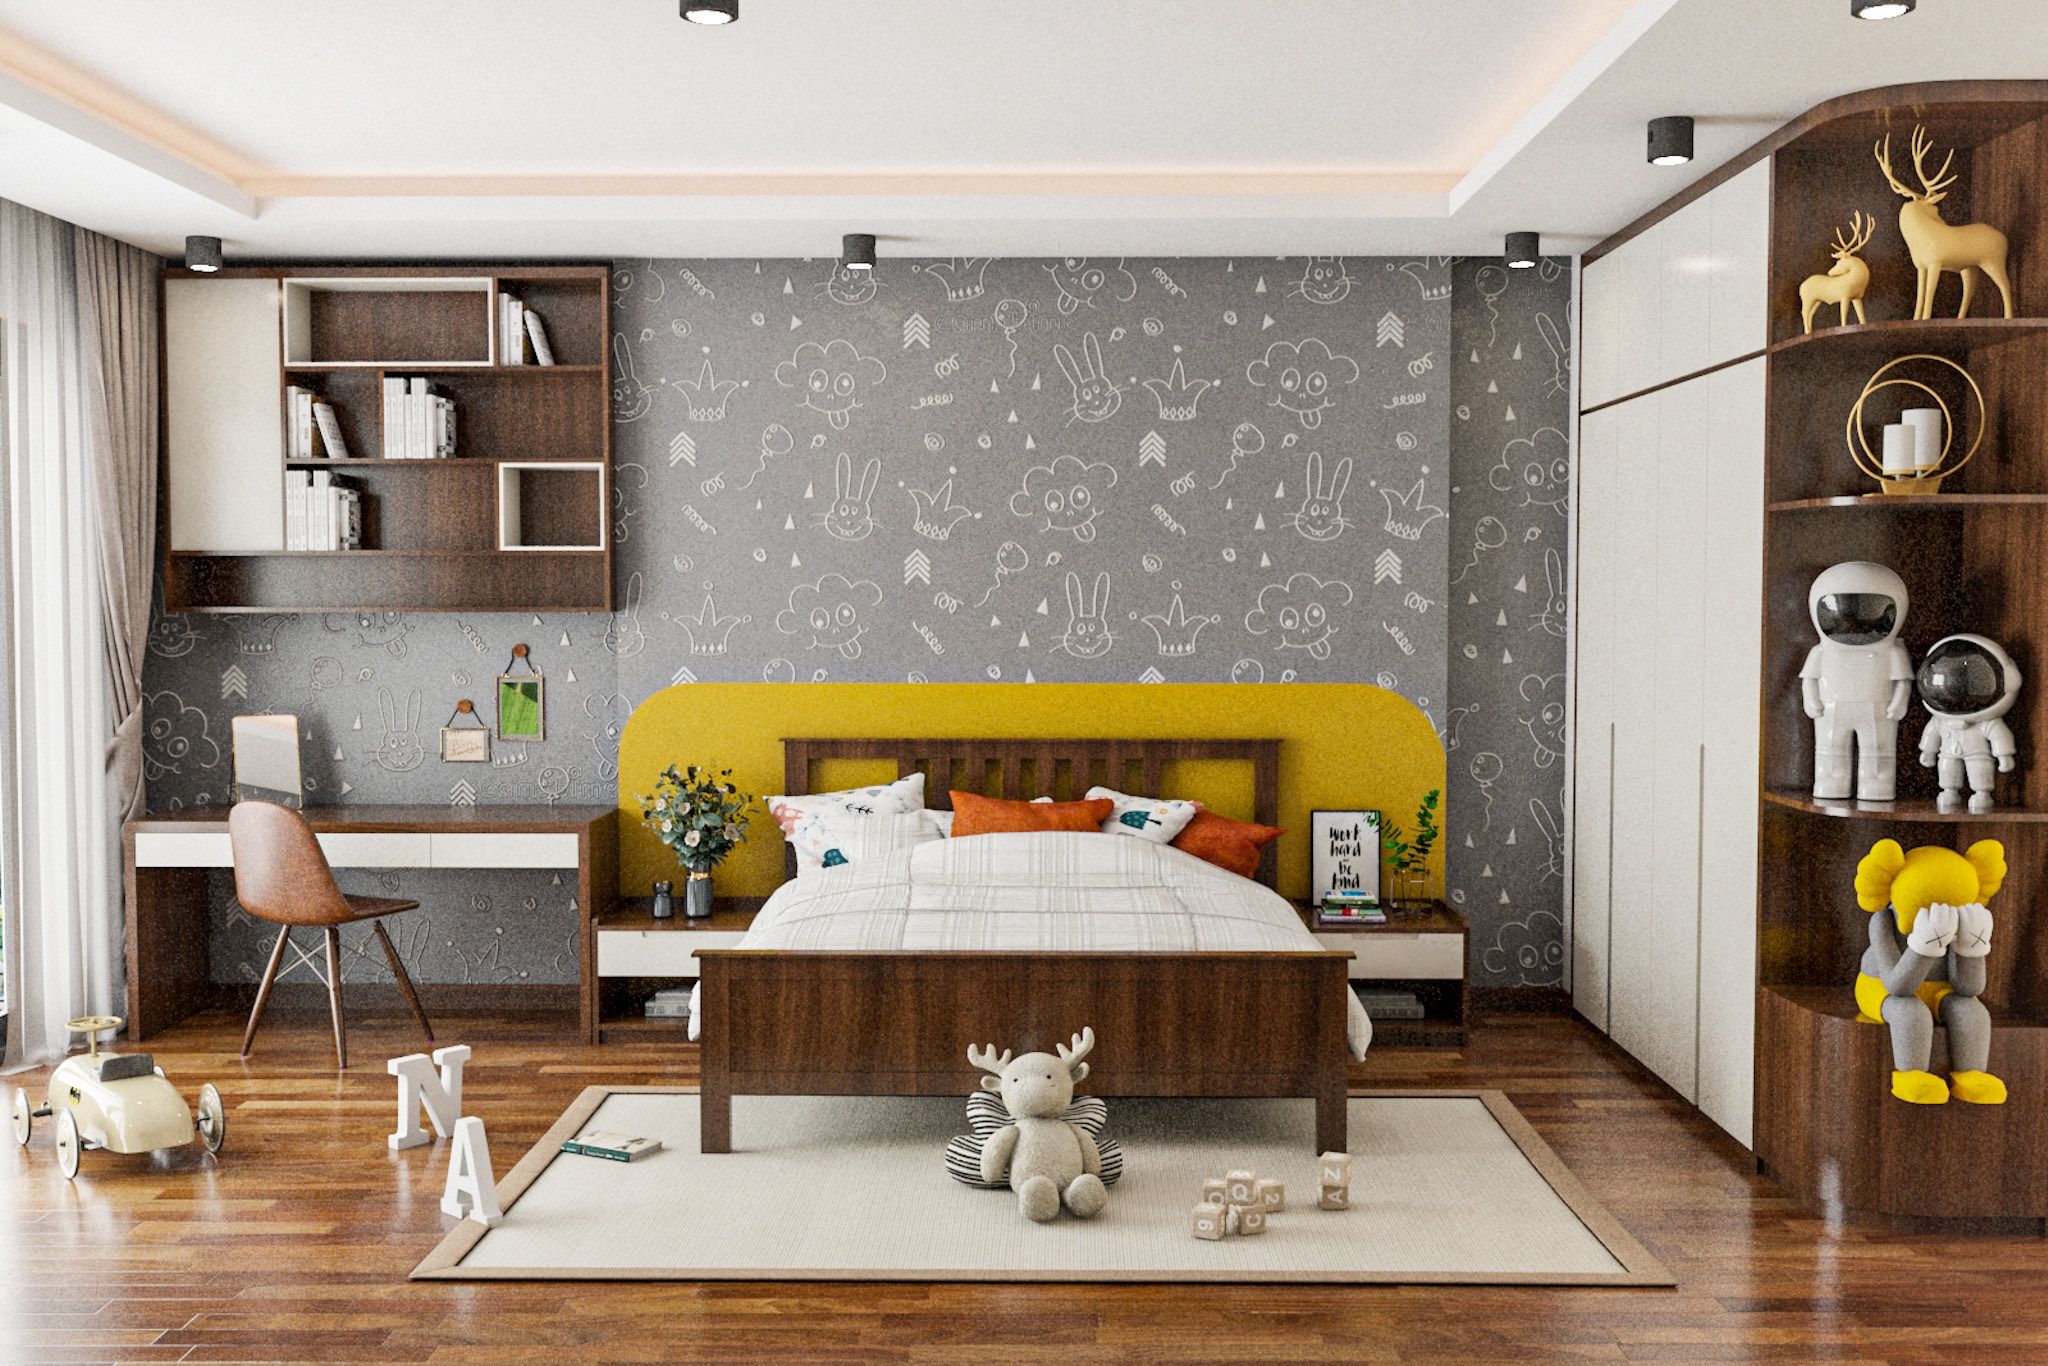 Modern Kids Room With A Wooden Queen Size Bed And Side Tables